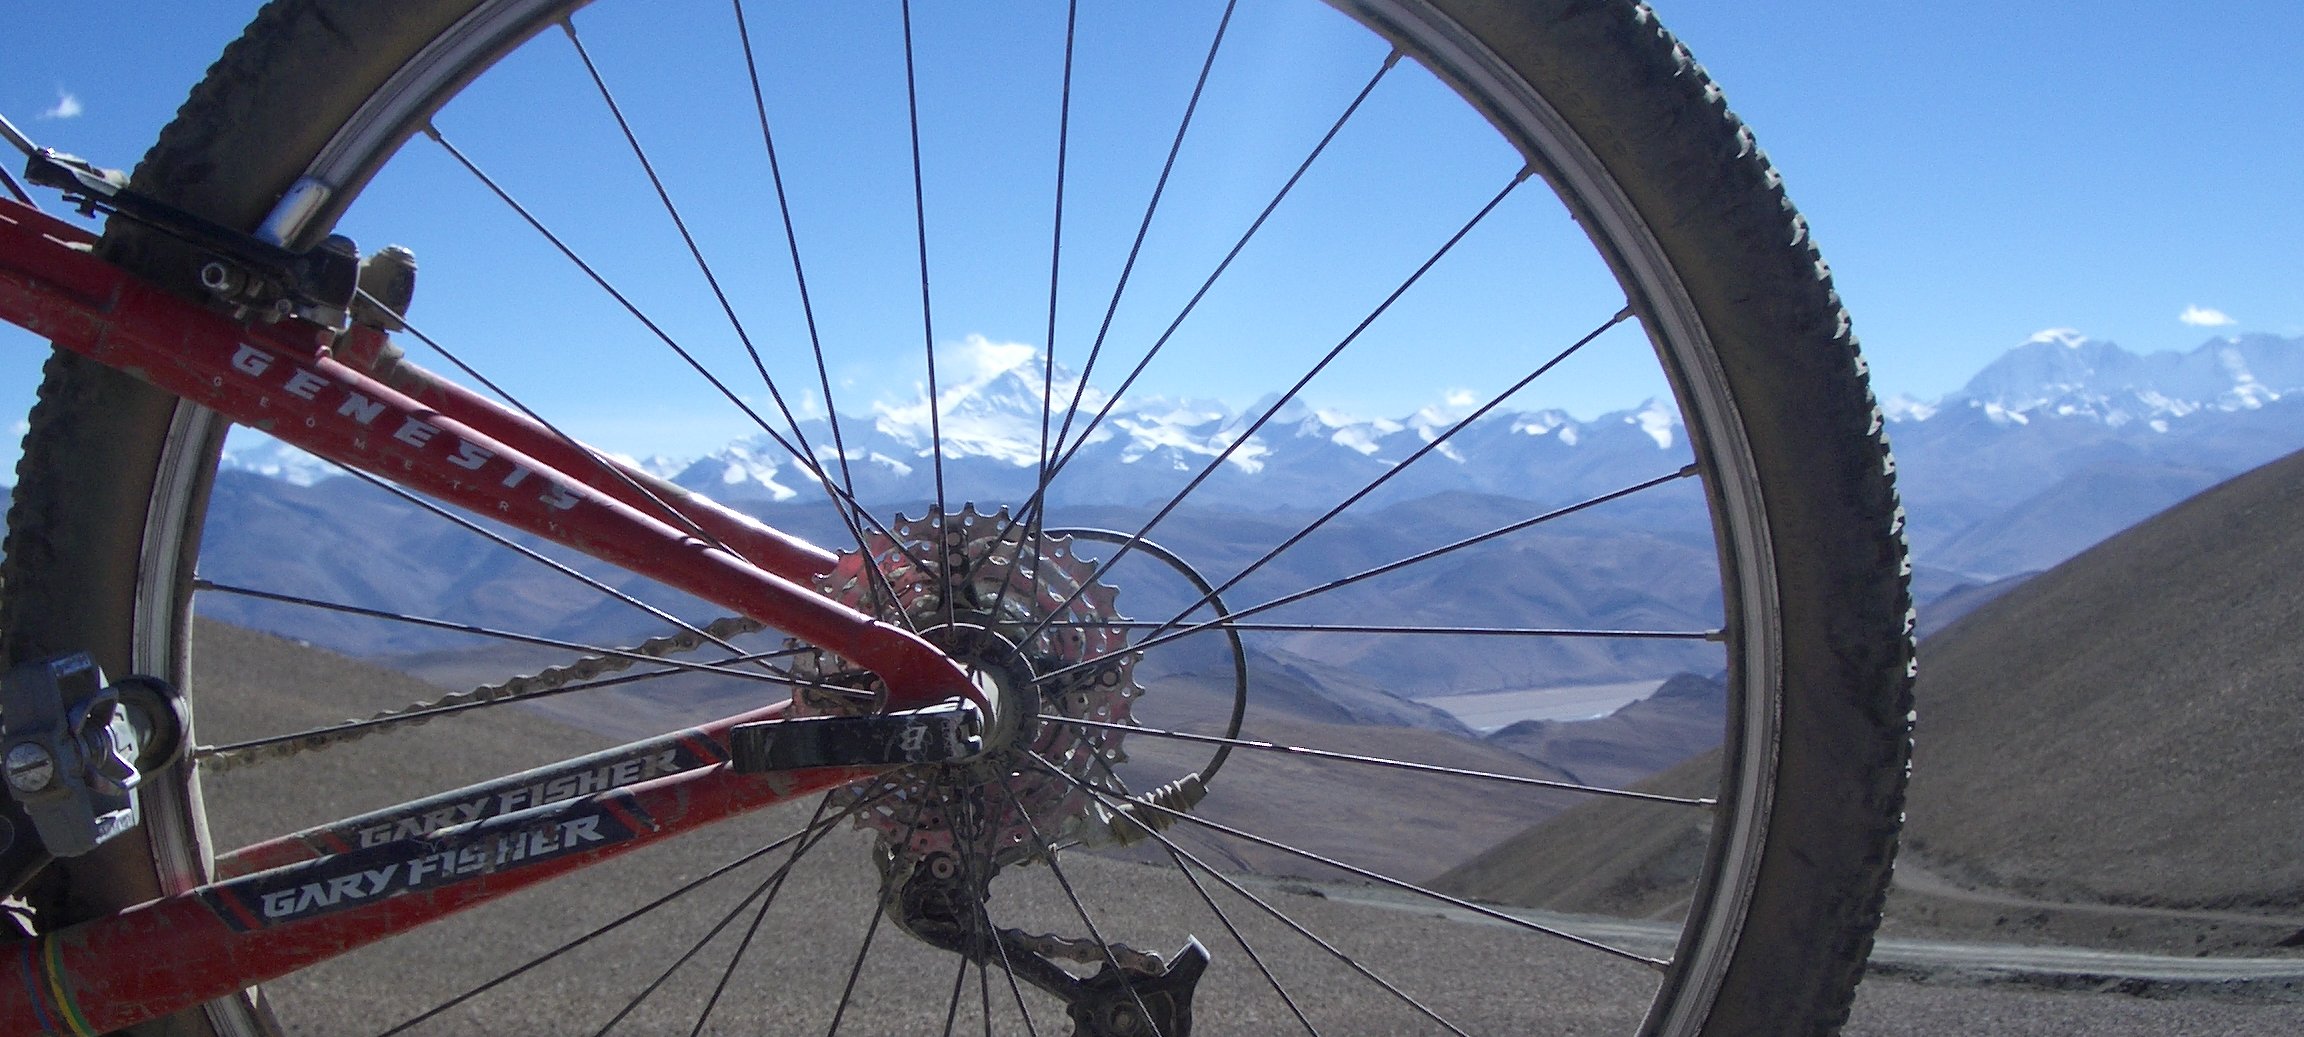 Photos from our Lhasa to Kathmandu Cycling Holiday